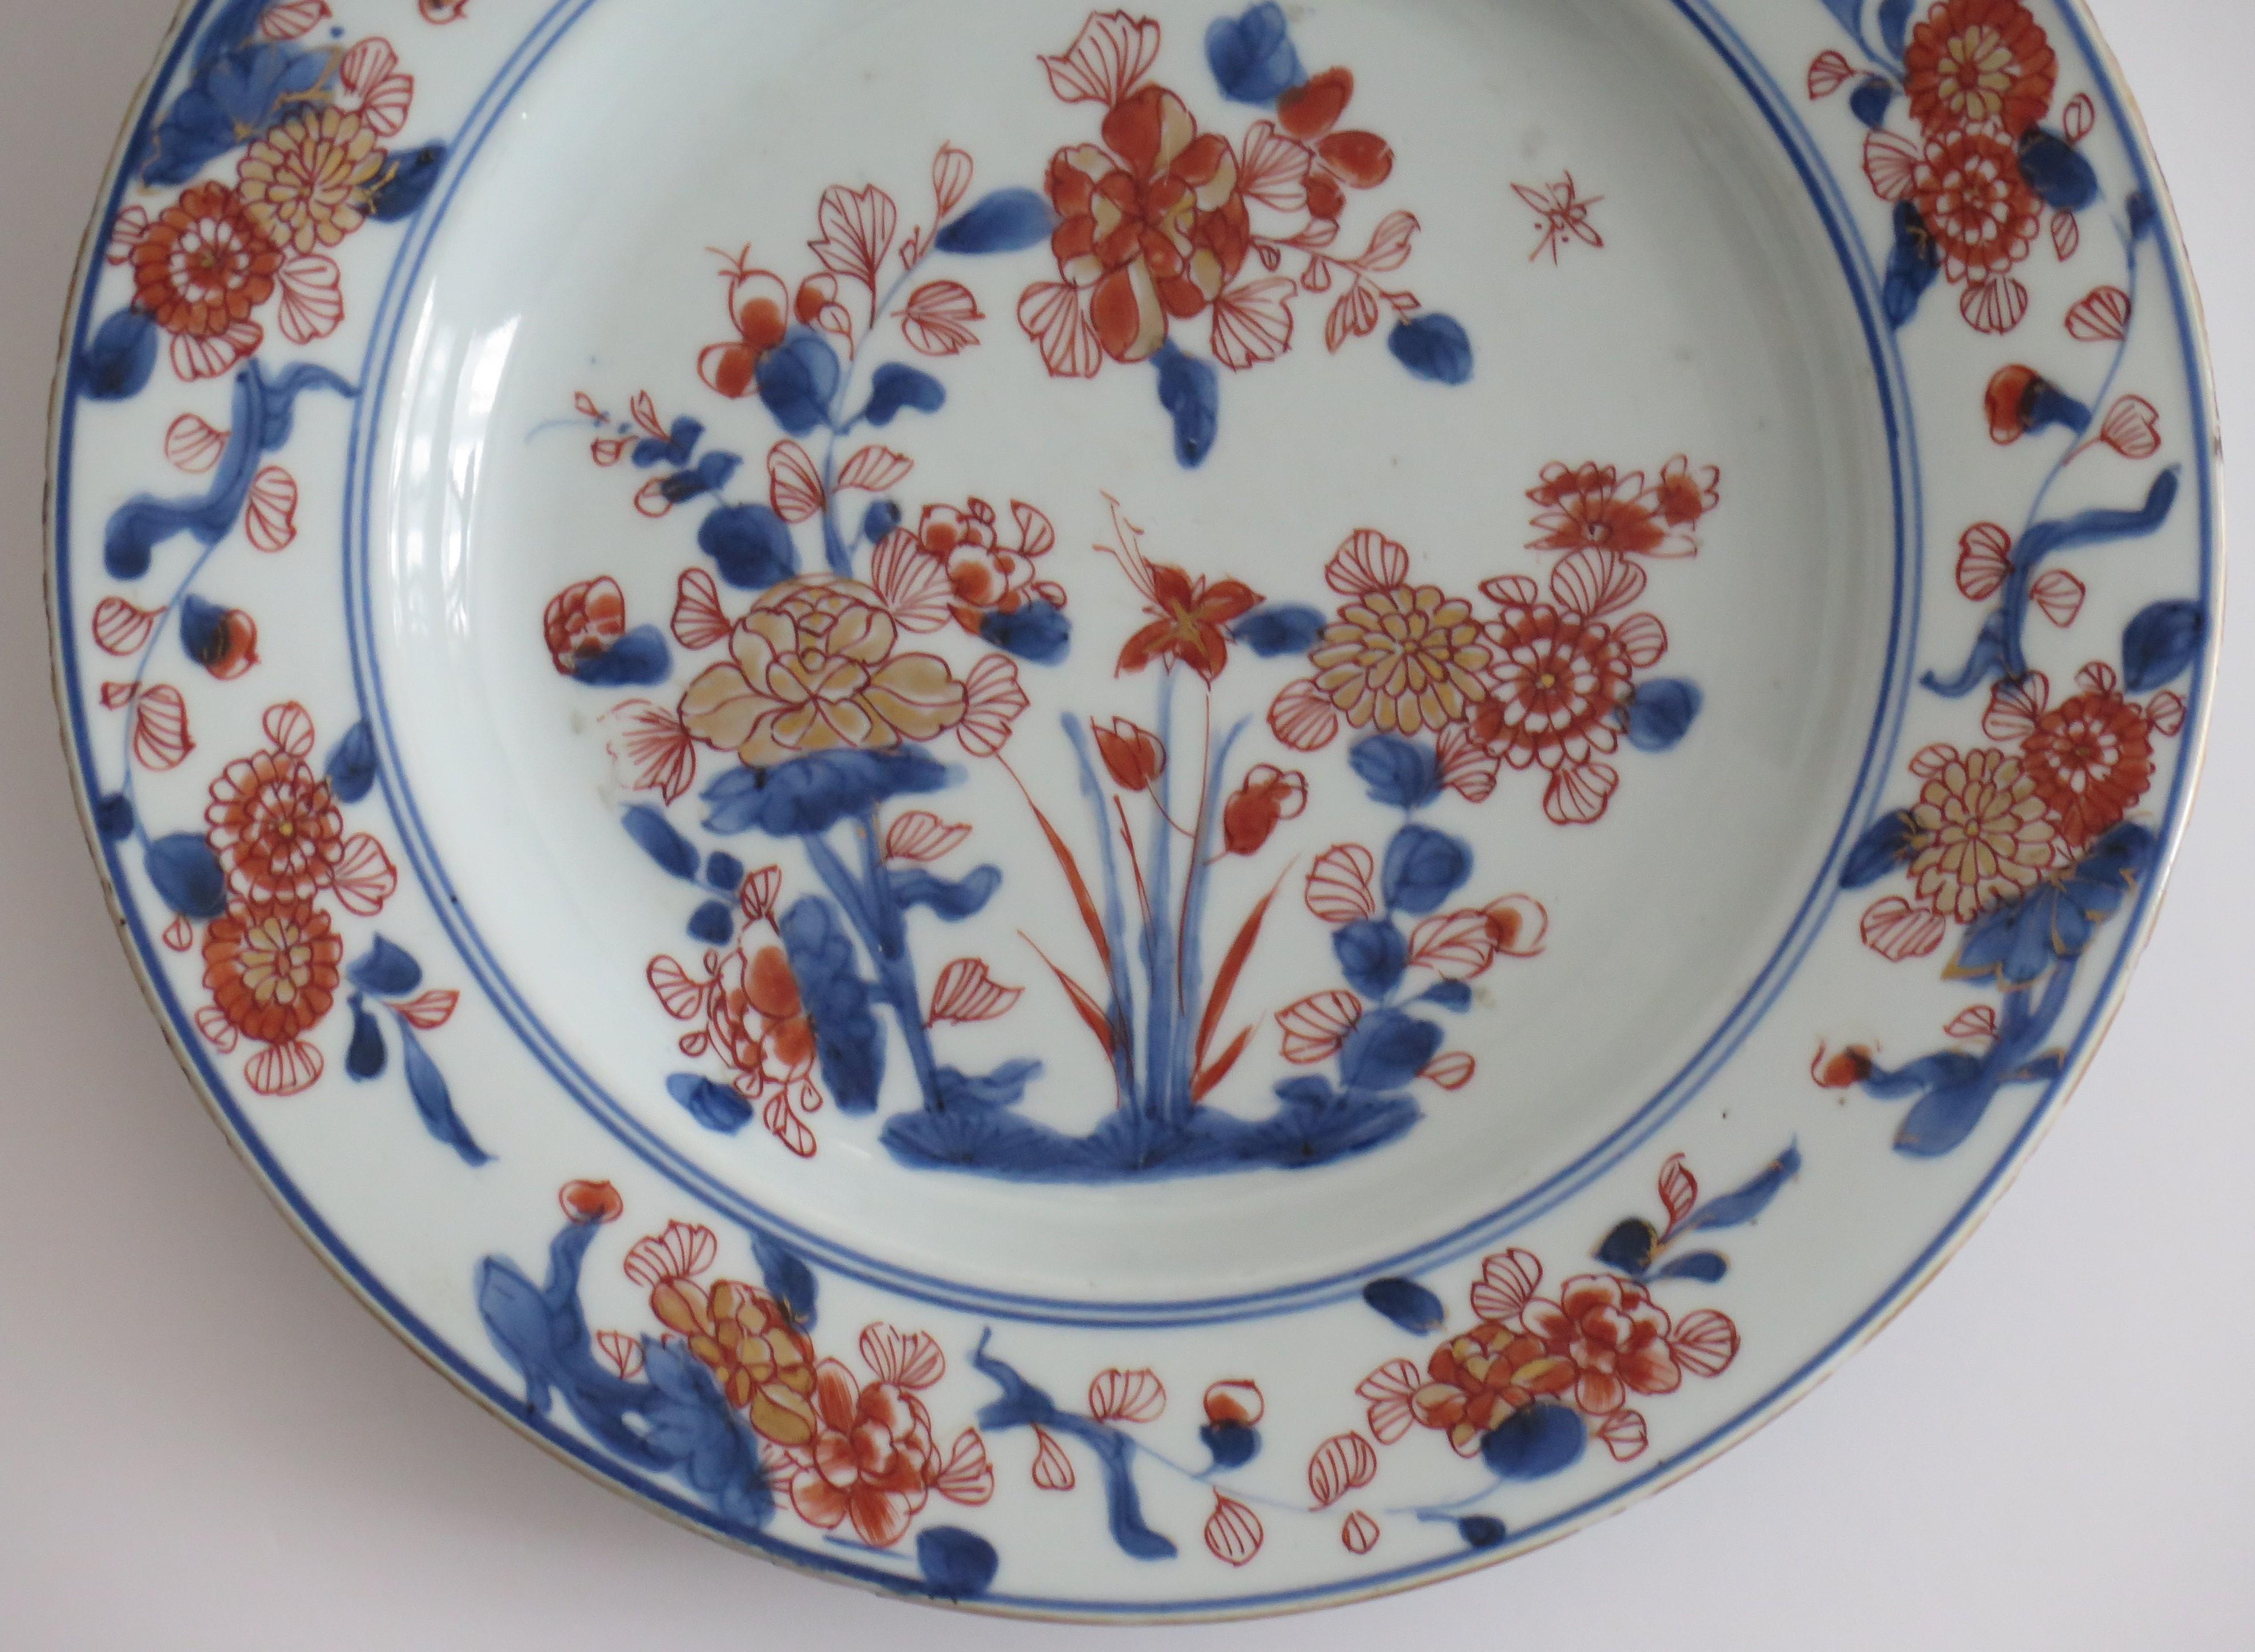 Chinese Export Chinese Imari Porcelain Plate or Bowl Qing Kangxi Mark and period, Ca 1700 For Sale